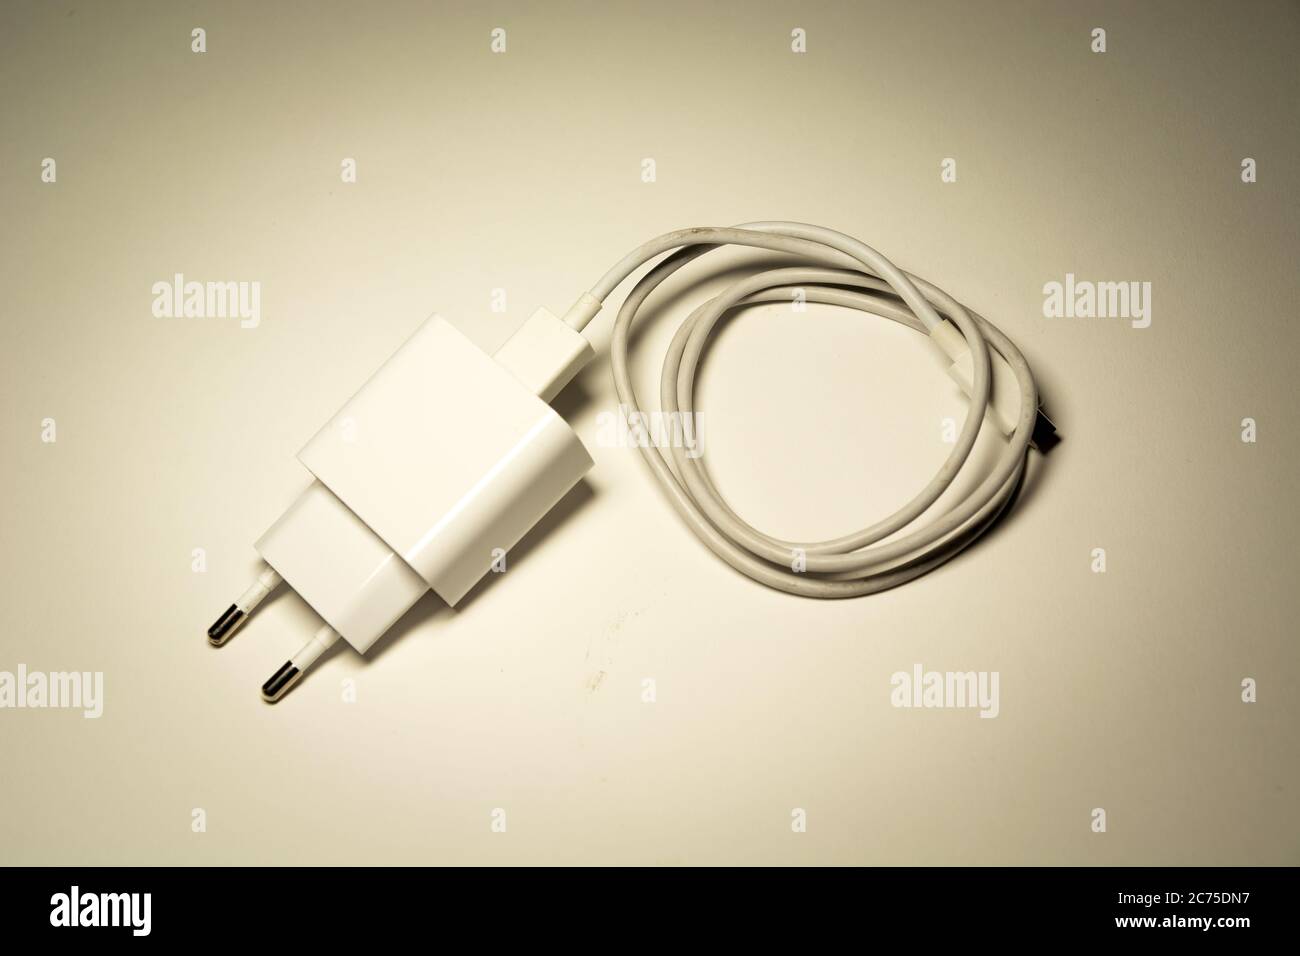 White phone charger with rolled-up cable, top view Stock Photo - Alamy